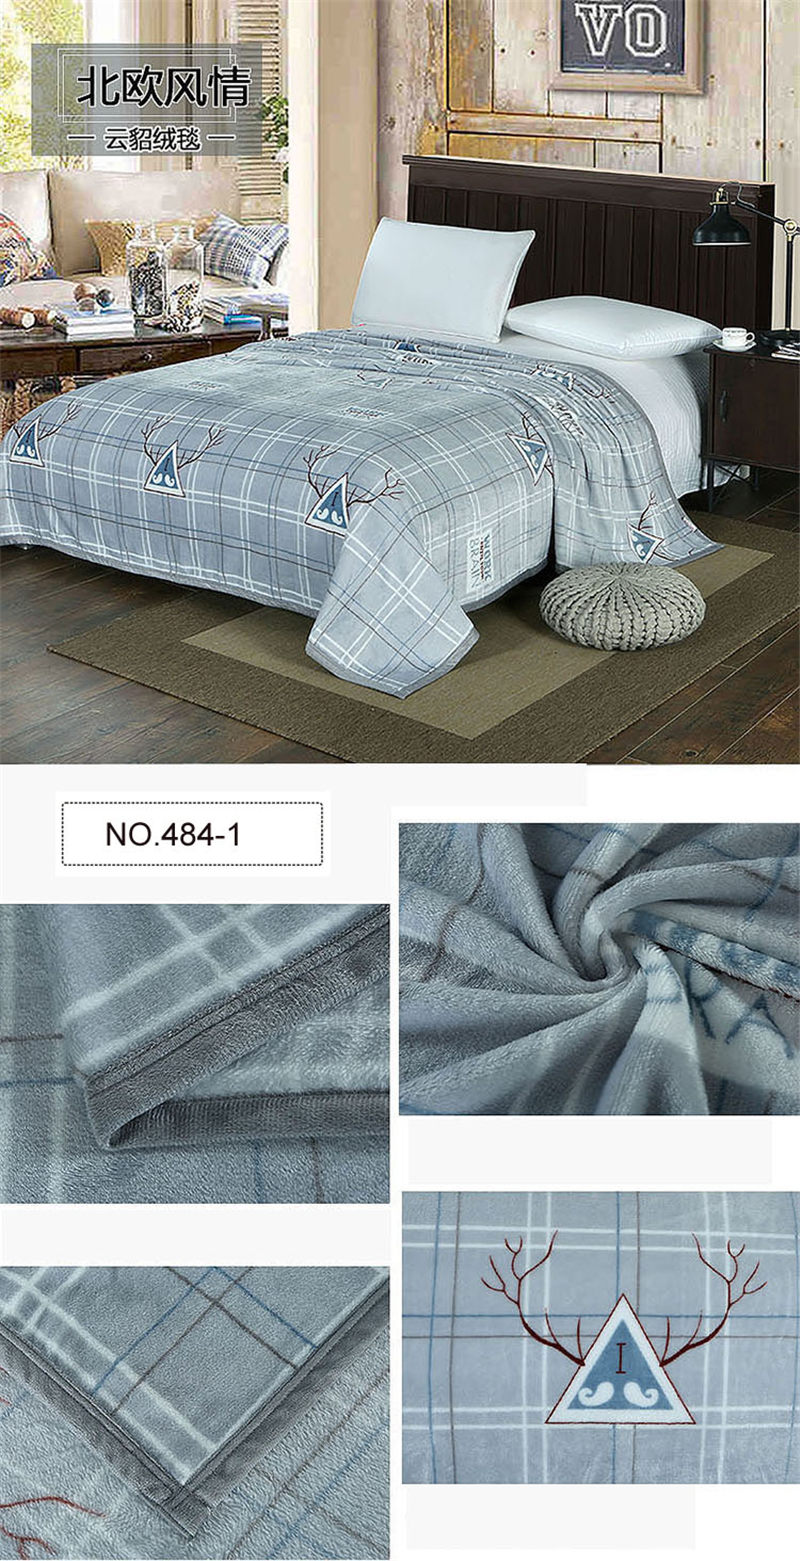 Polyester Blanket Made in China Sandy Brown Gingham